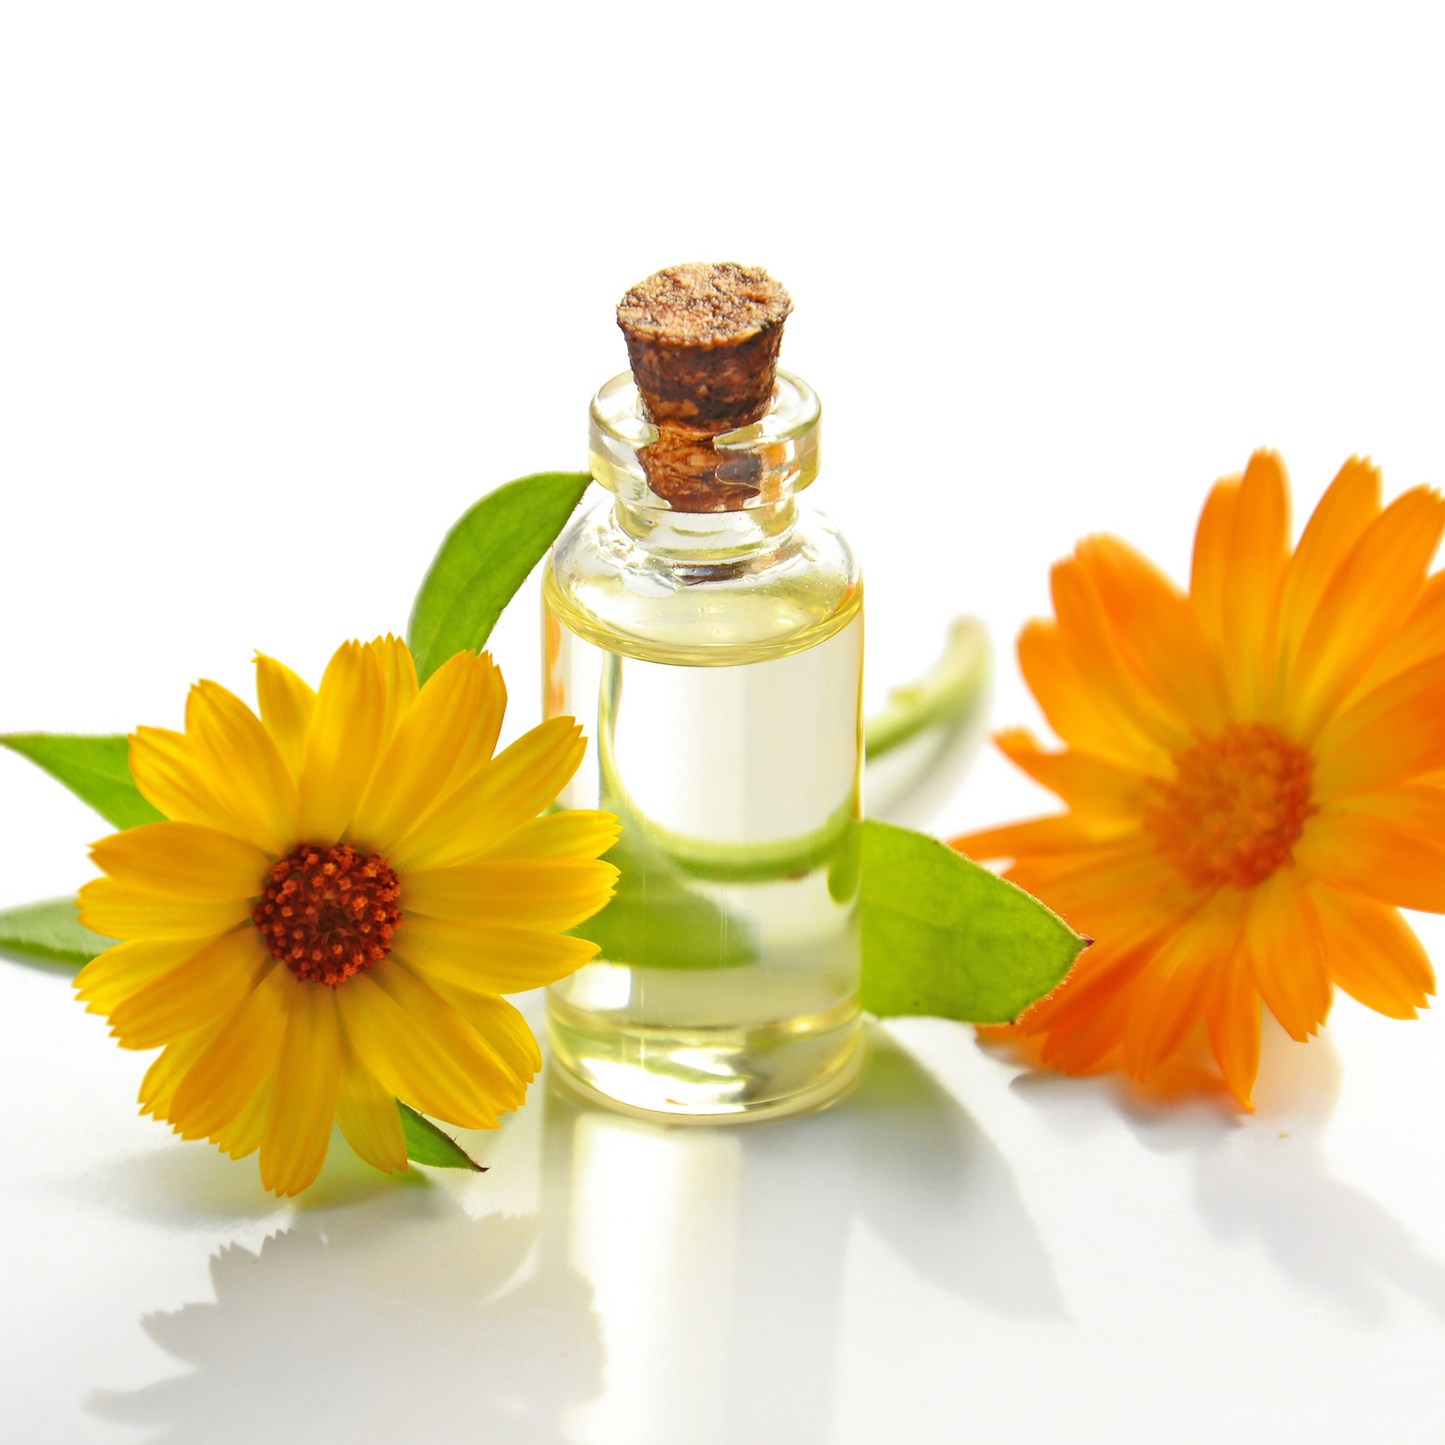 'Pacific Beauty' Calendula flowers next to a bottle of calendula-infused oil